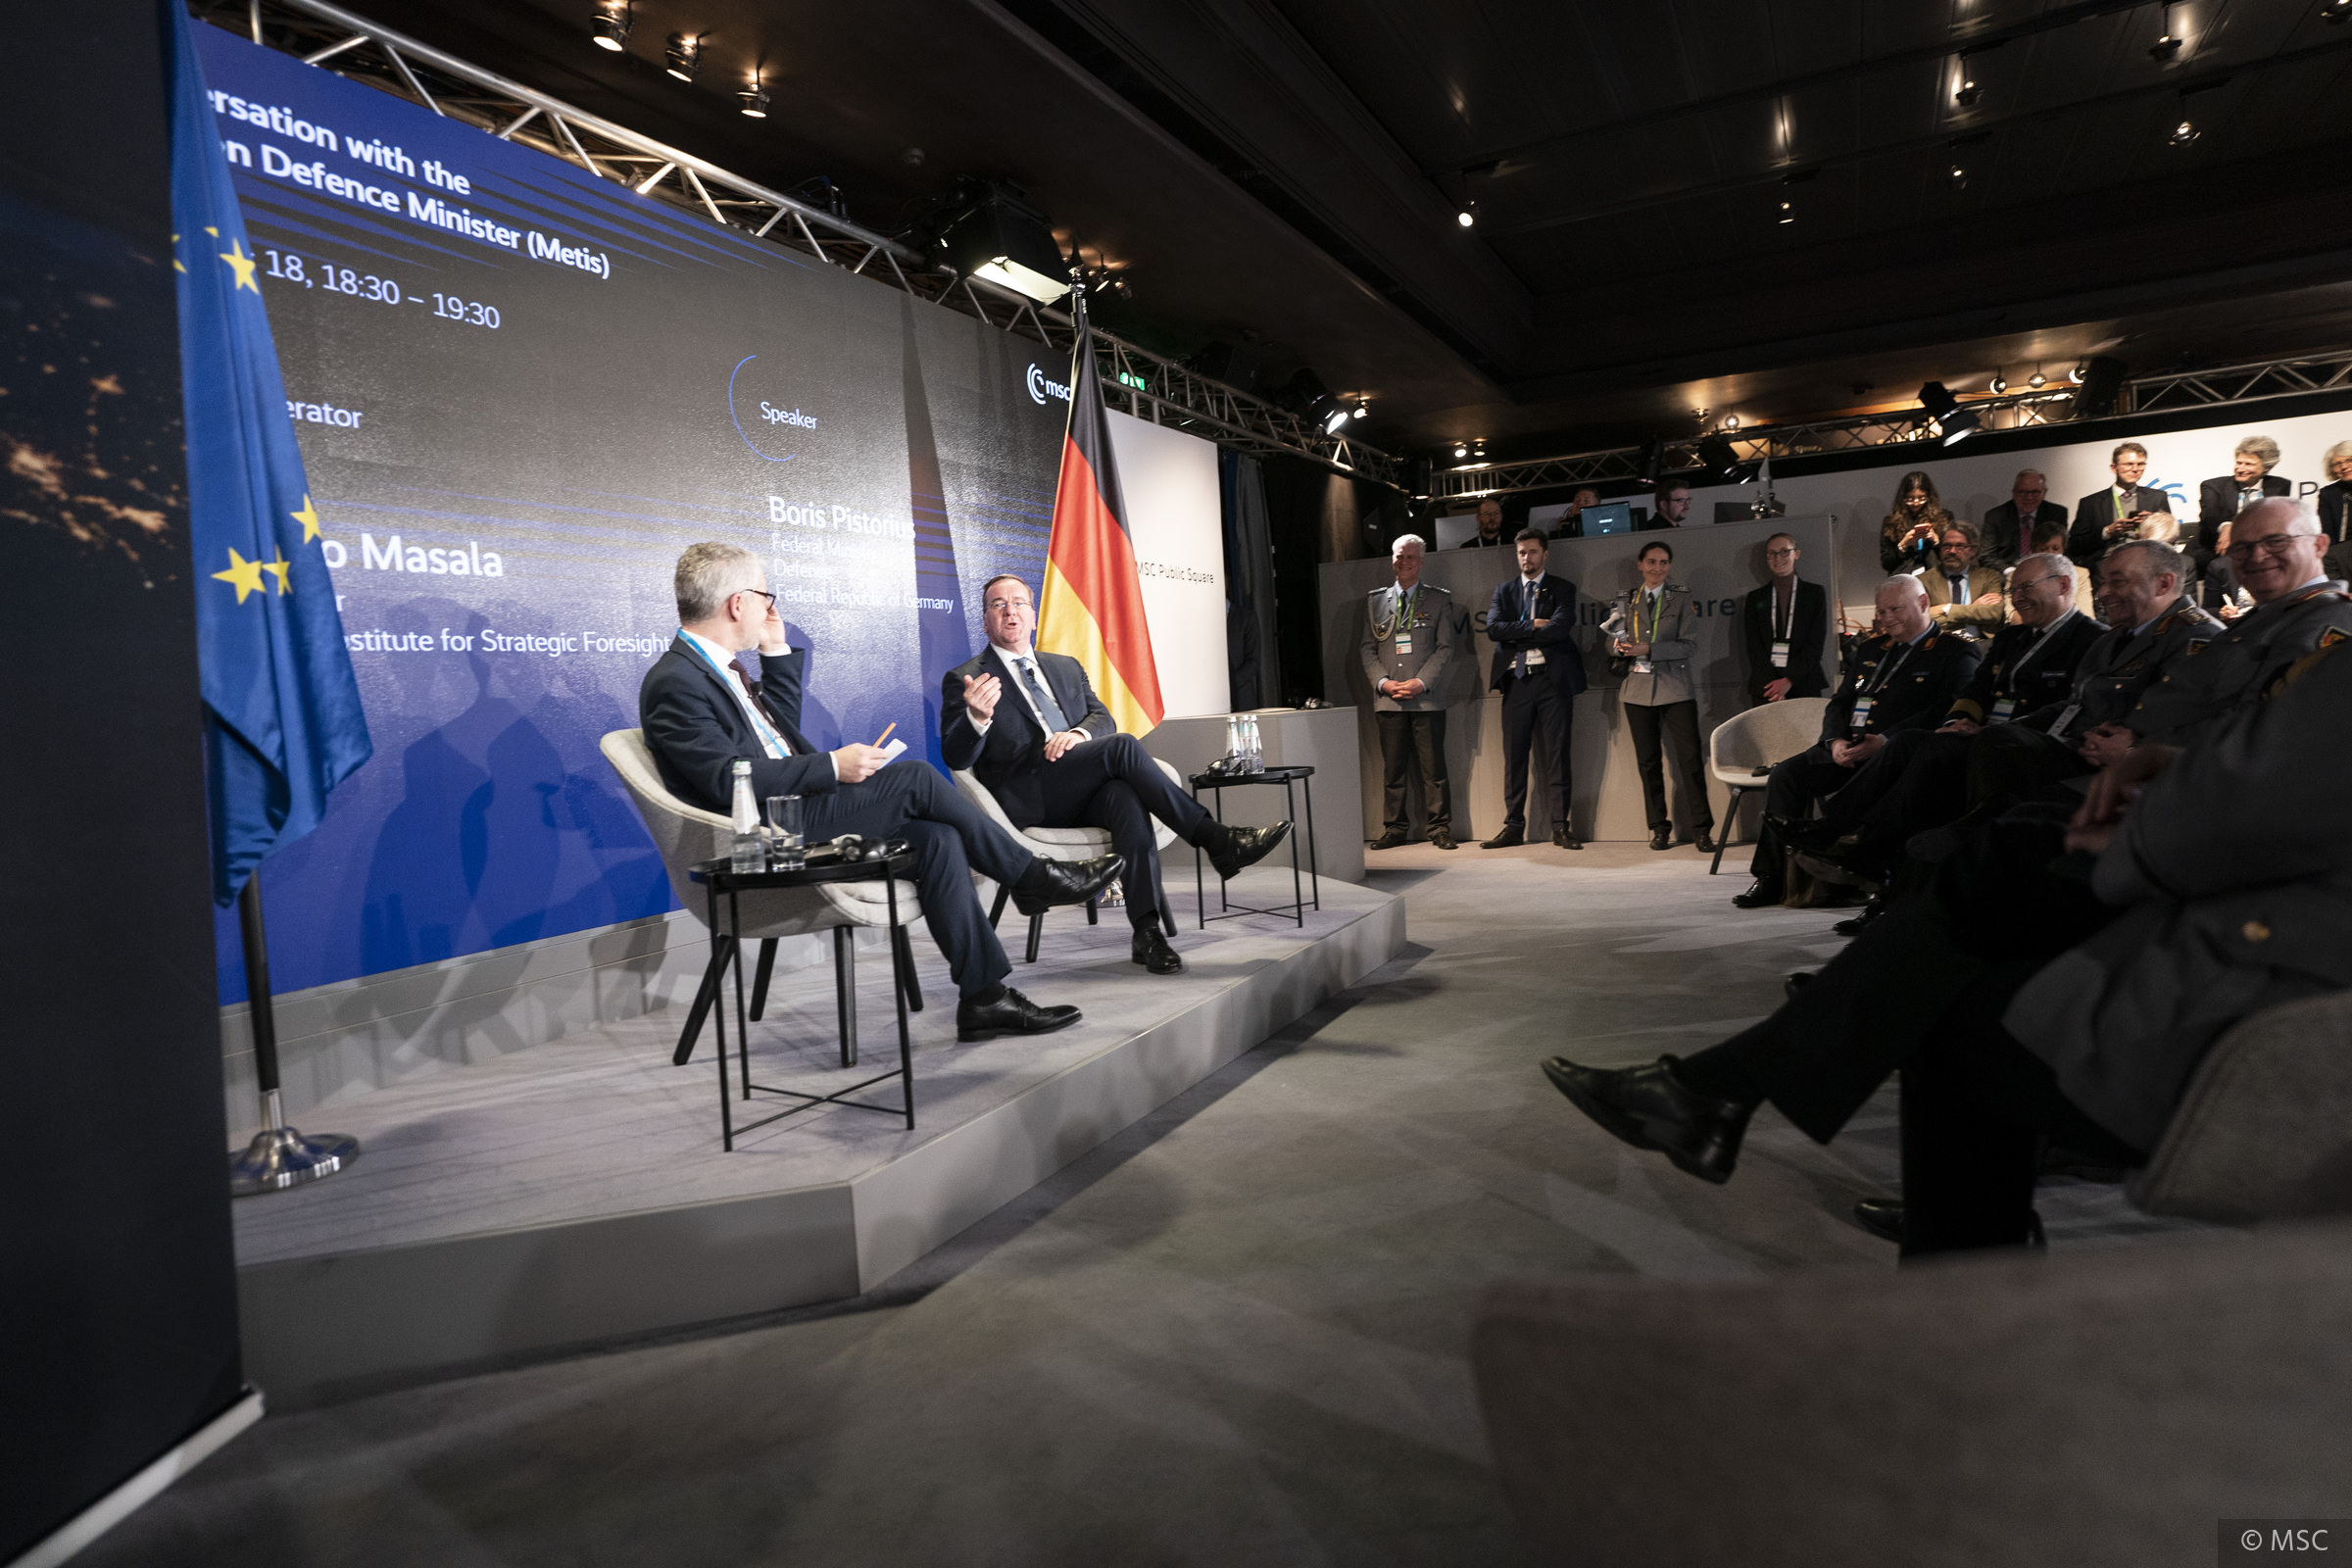 MSC Public Square: Conversation with the new German Defence Minister